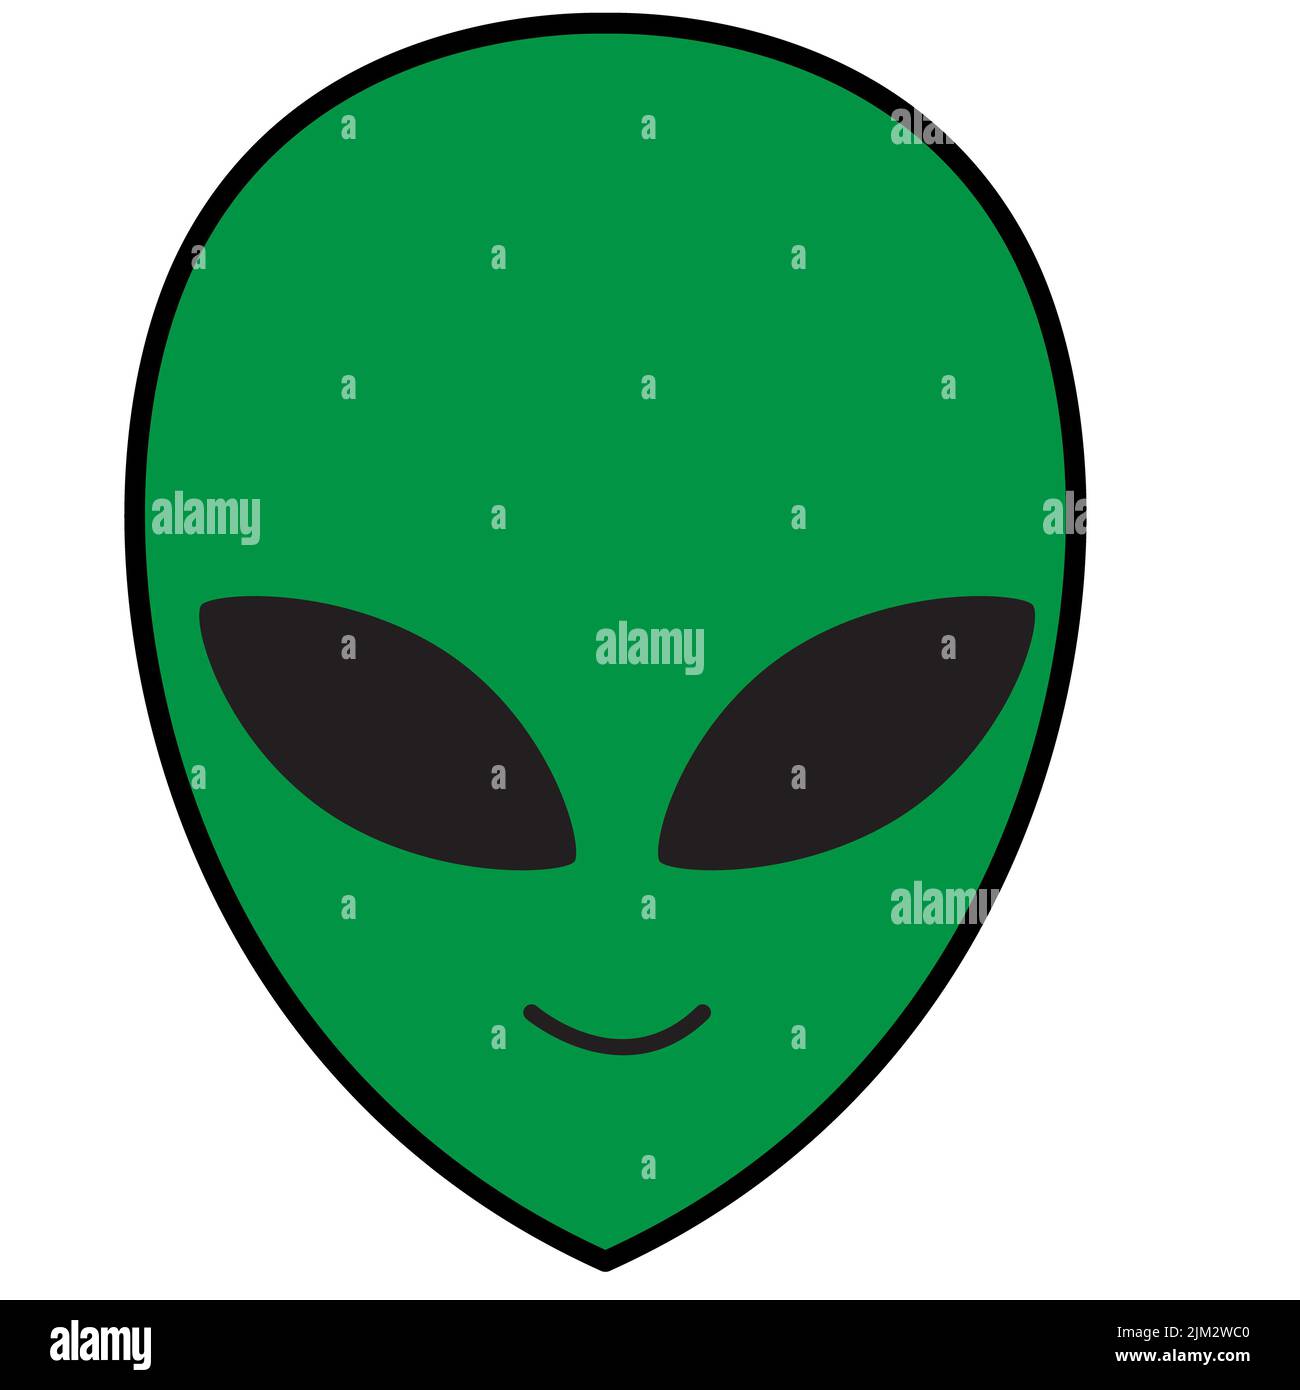 Alien green head icon on white background. Alien face sign. flat style. Stock Photo